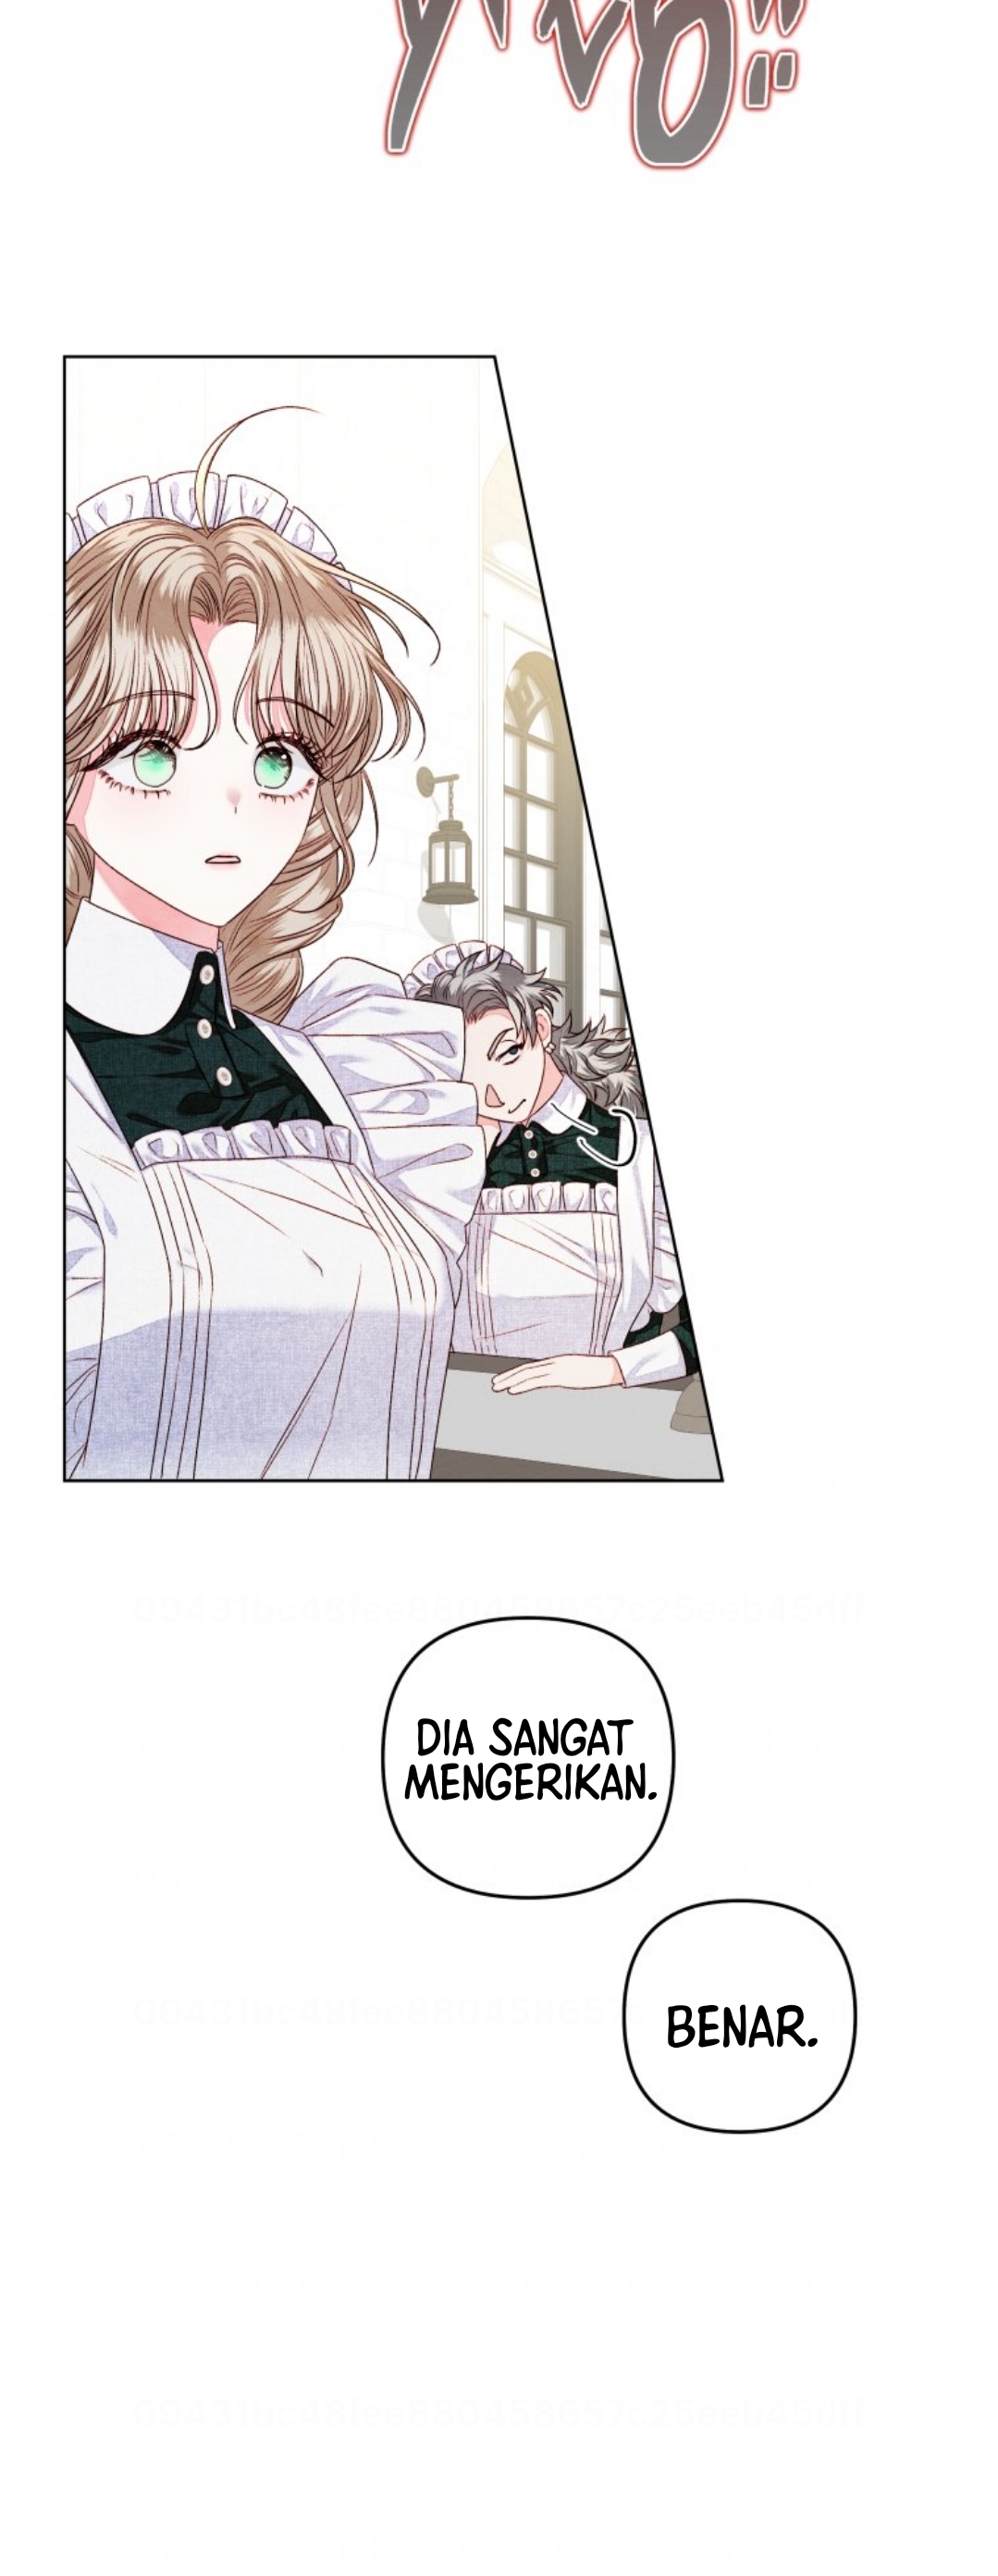 A Maid Was More Of A Calling Than A Princess Chapter 7